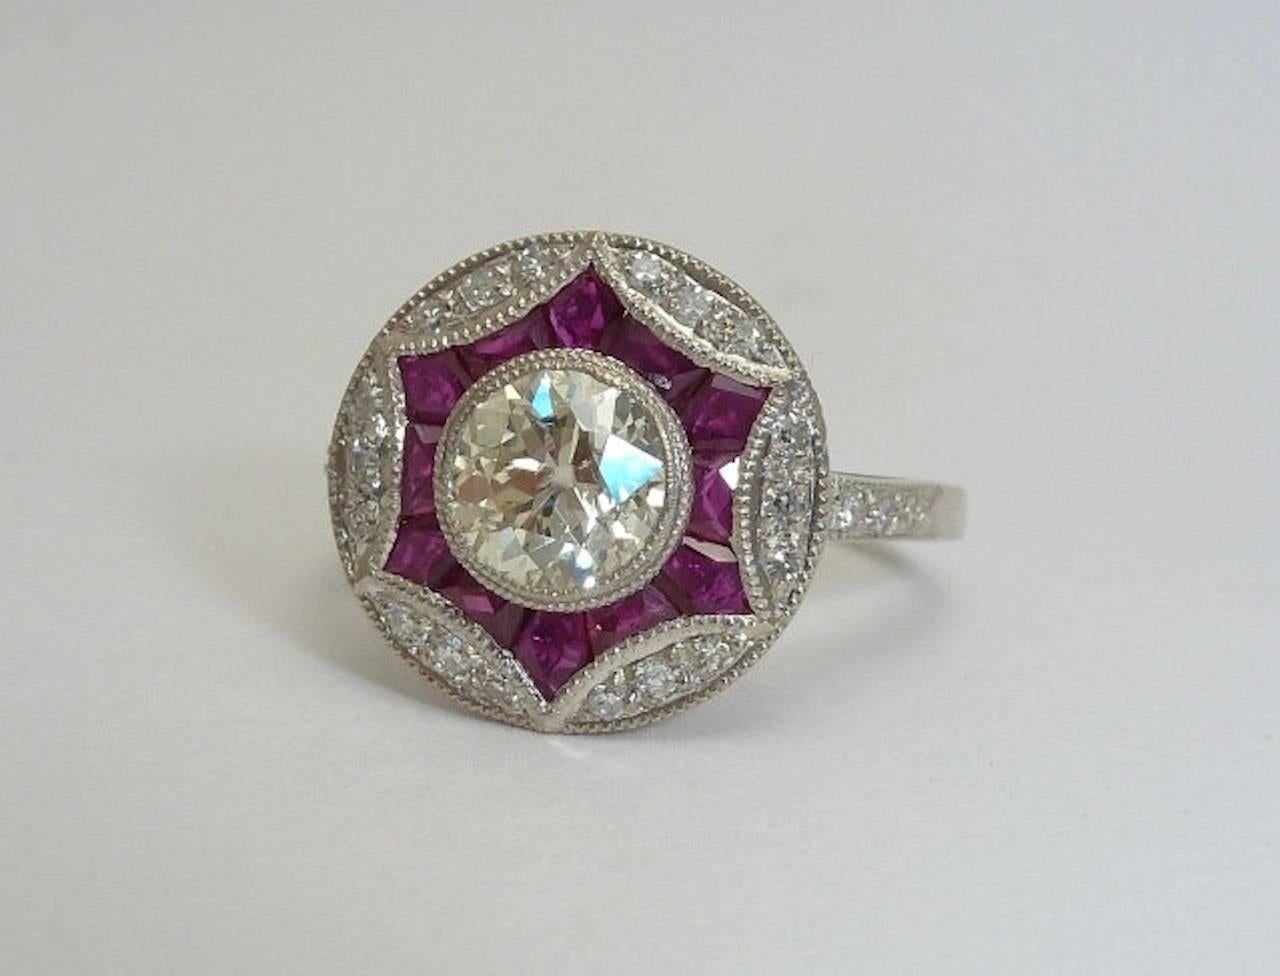 Stunning 0.72 Carat Ruby Diamond Platinum Star Form Ring In Excellent Condition For Sale In Boston, MA